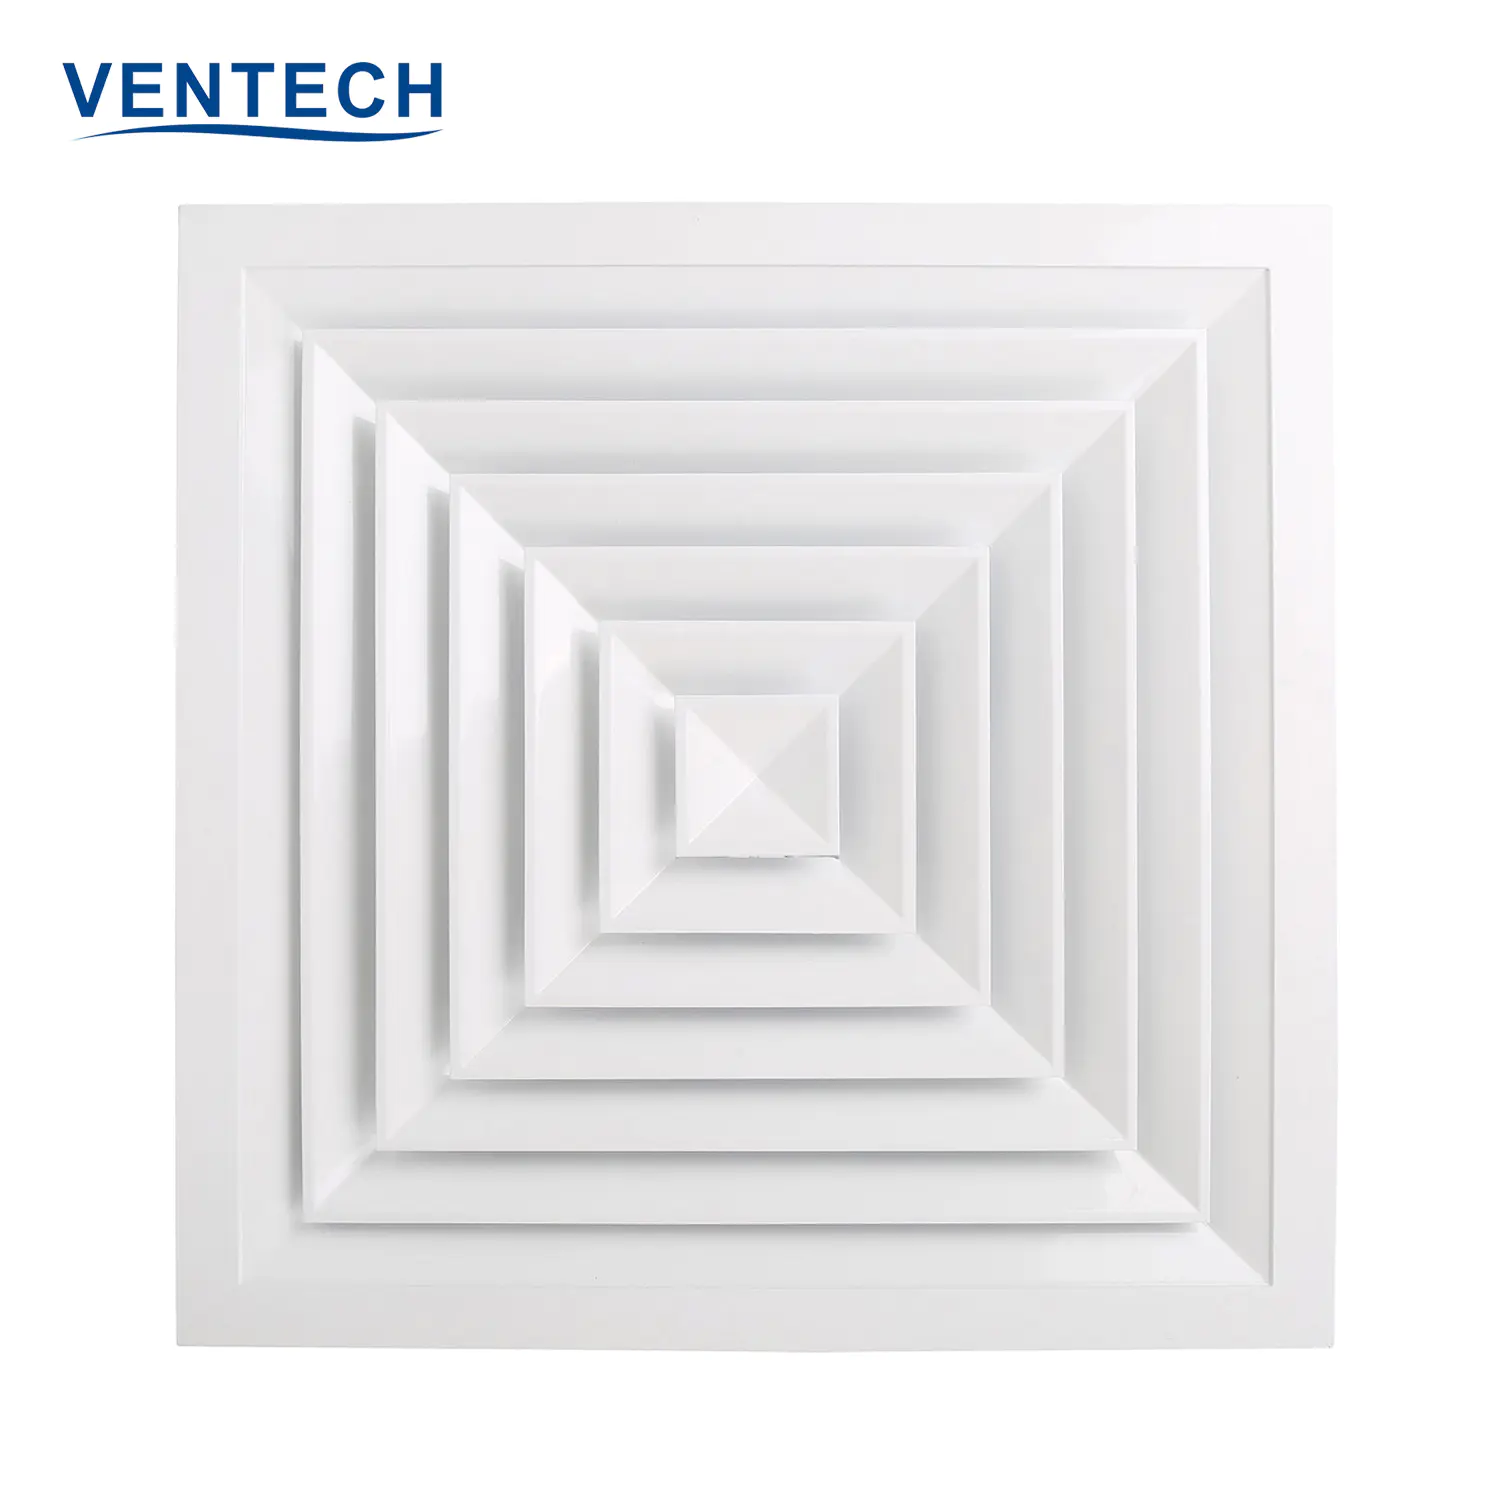 Hvac System VENTECH Exhaust Air Aluminum Conditioning Square Ceiling Air Duct Diffusers